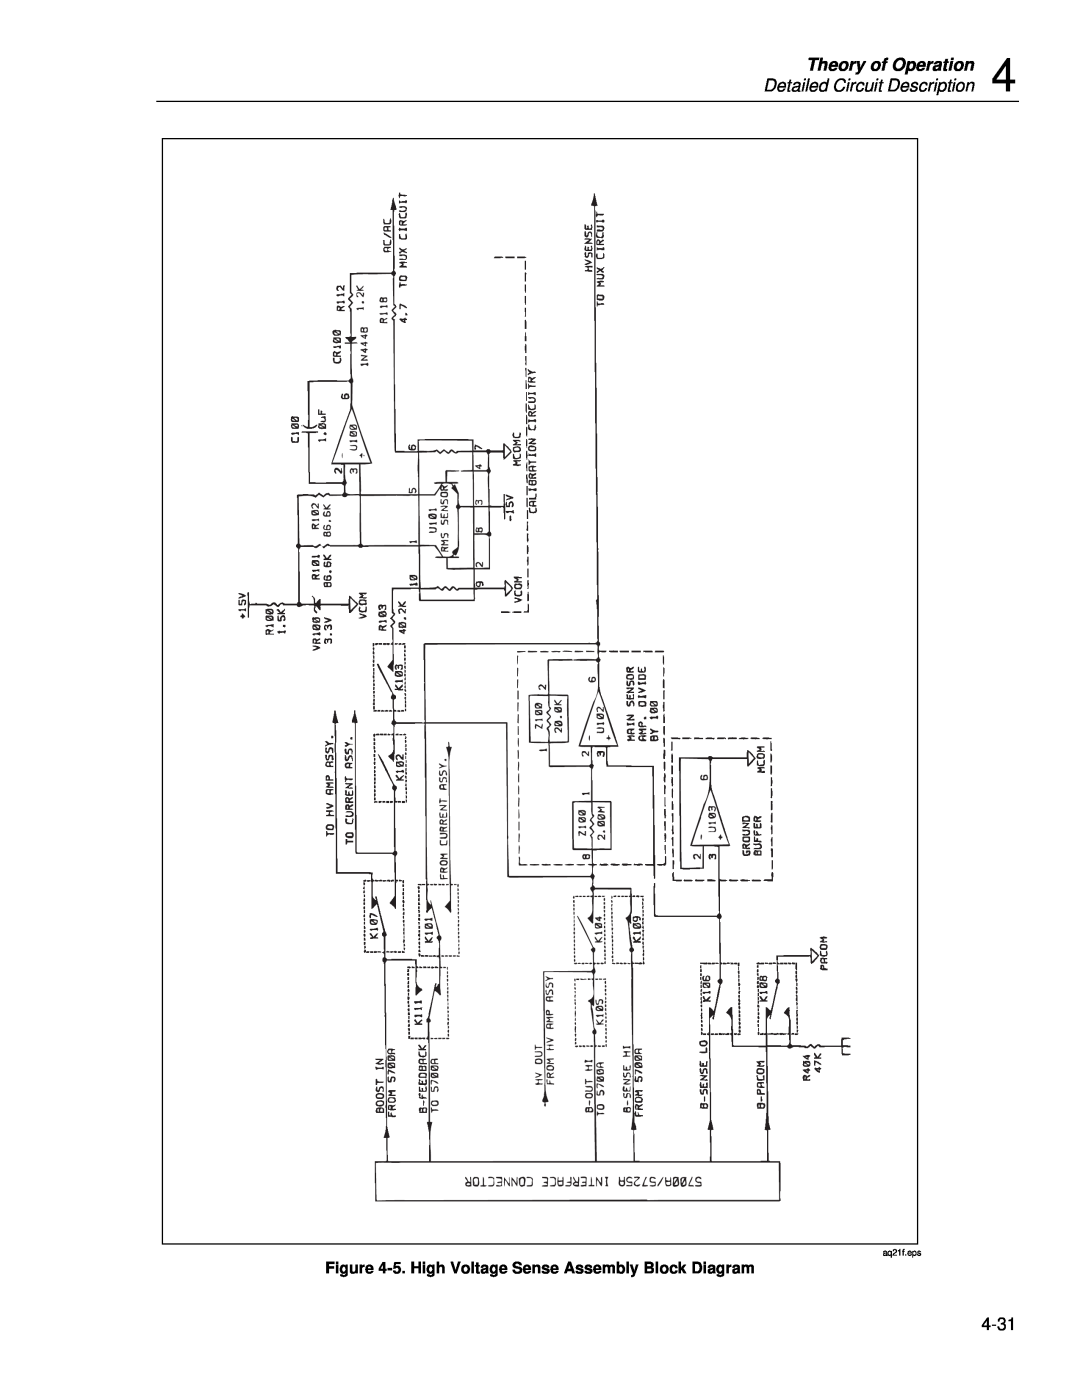 Fluke 5725A instruction manual Theory of Operation, Detailed Circuit Description, aq21f.eps 